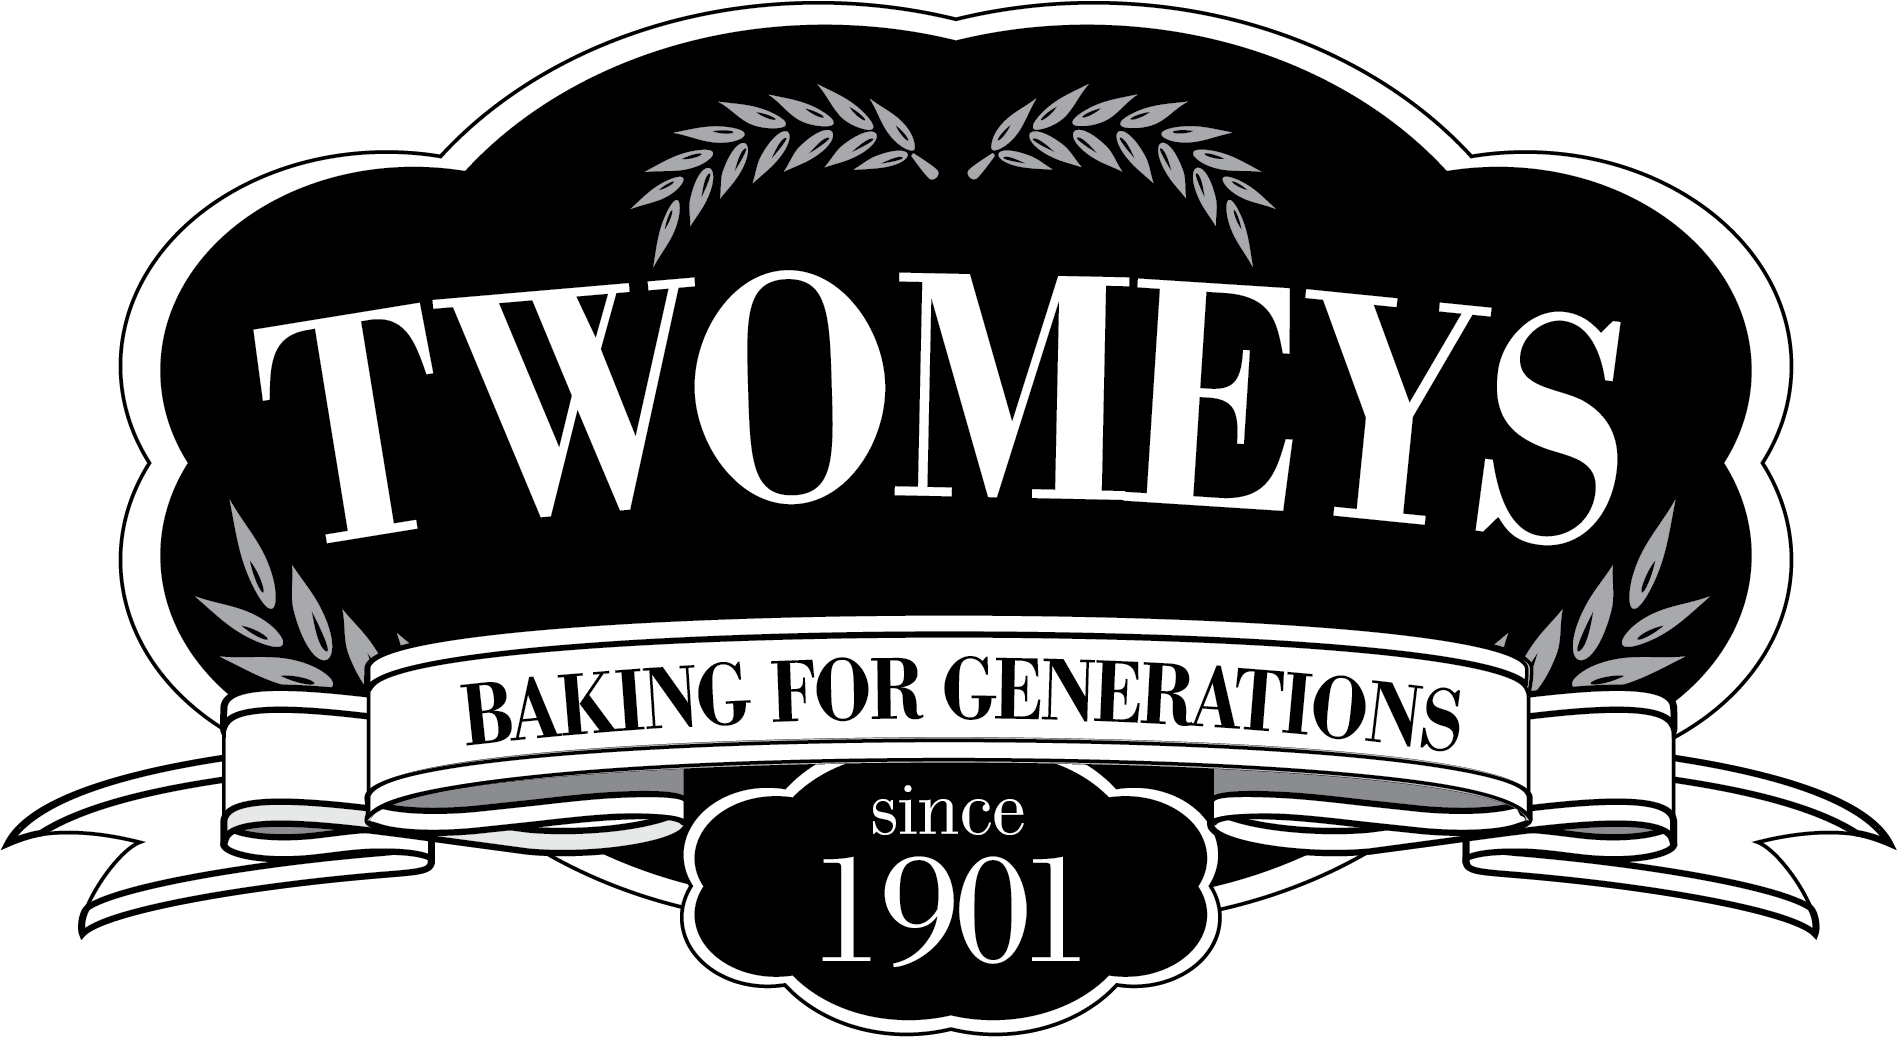 Twomey's Bakery